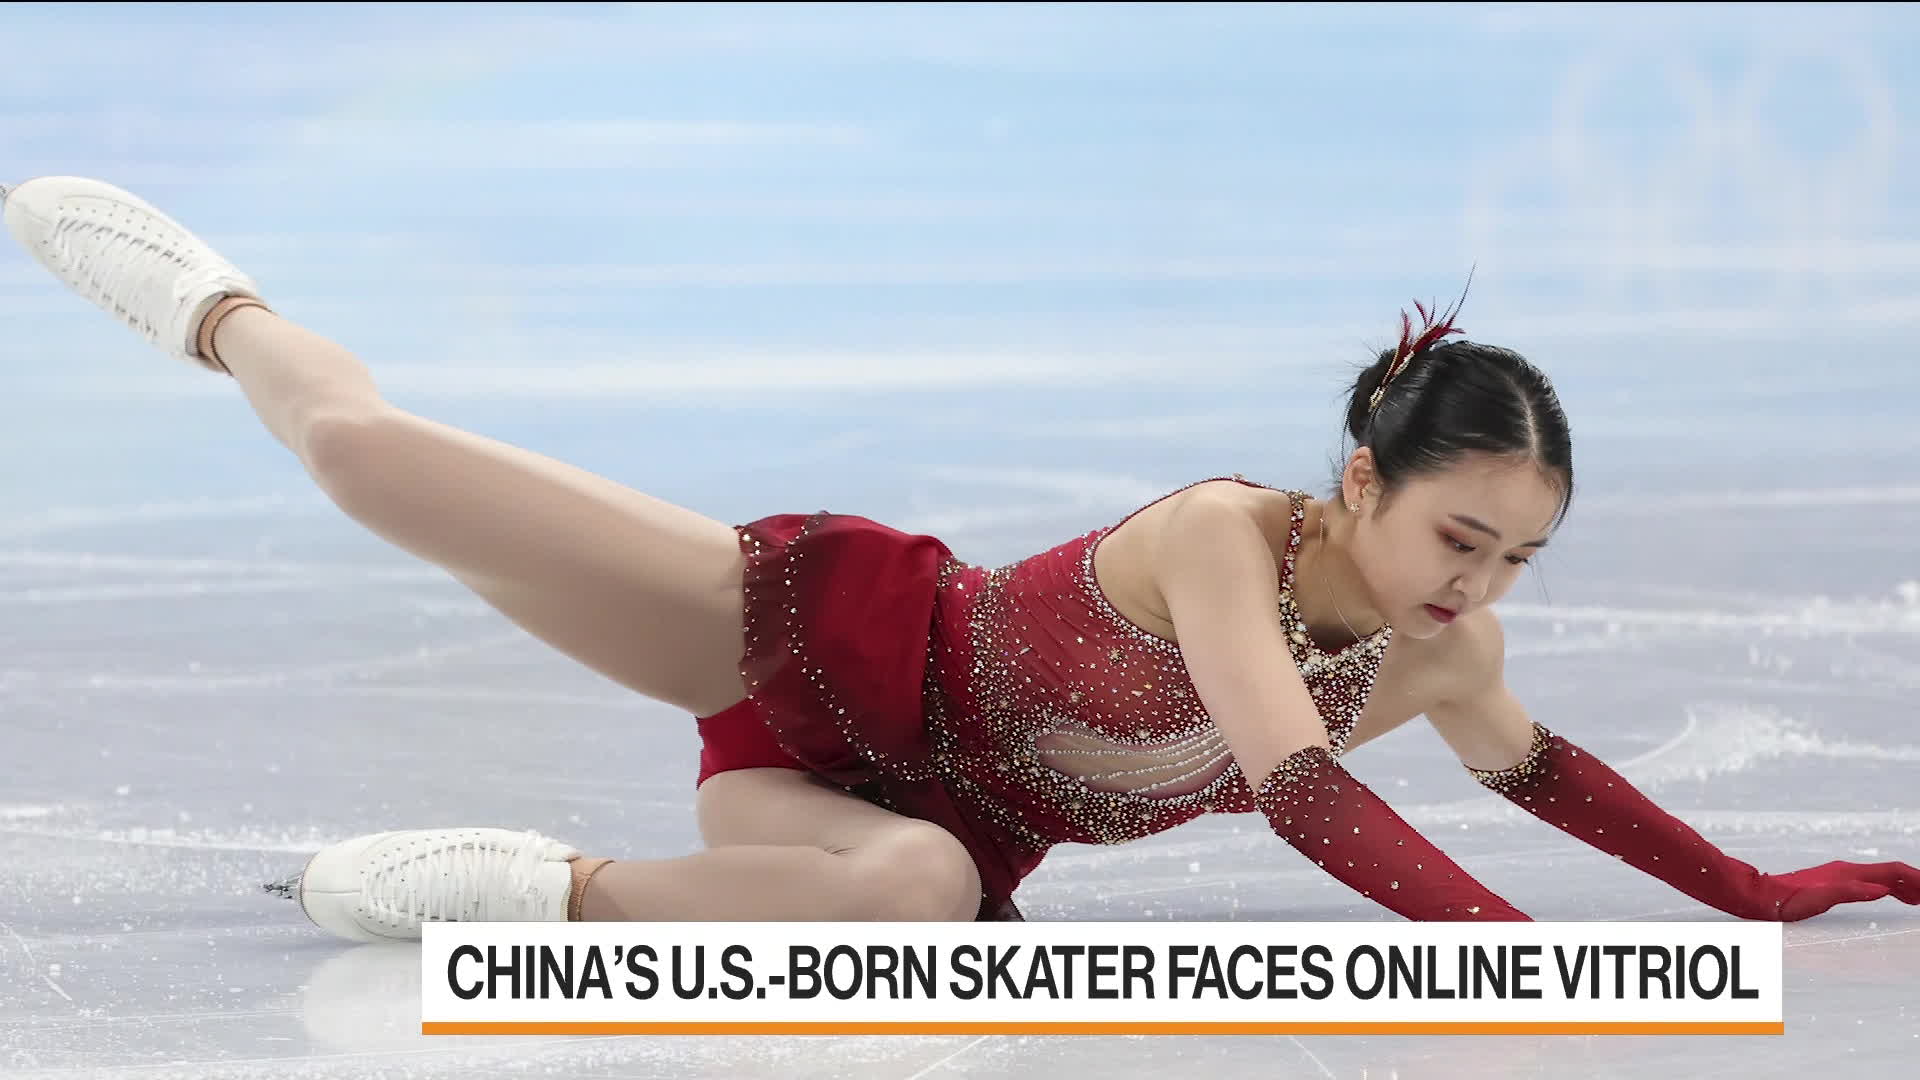 Watch Chinas U.S.-Born Skater Faces Online Vitriol After Fall